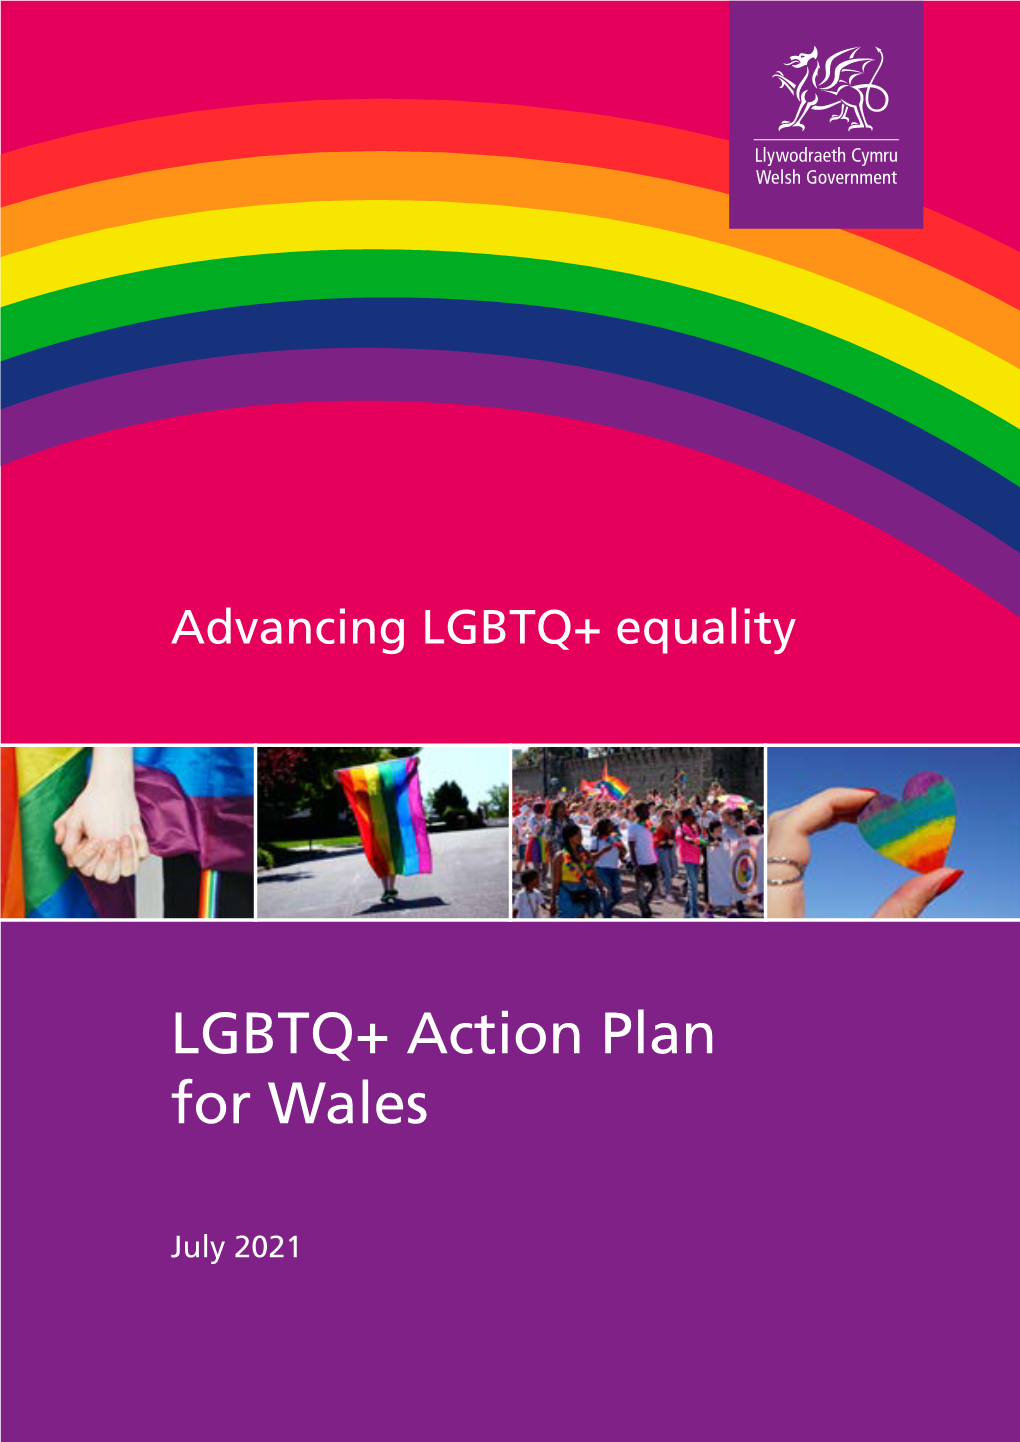 LGBTQ+ Action Plan for Wales